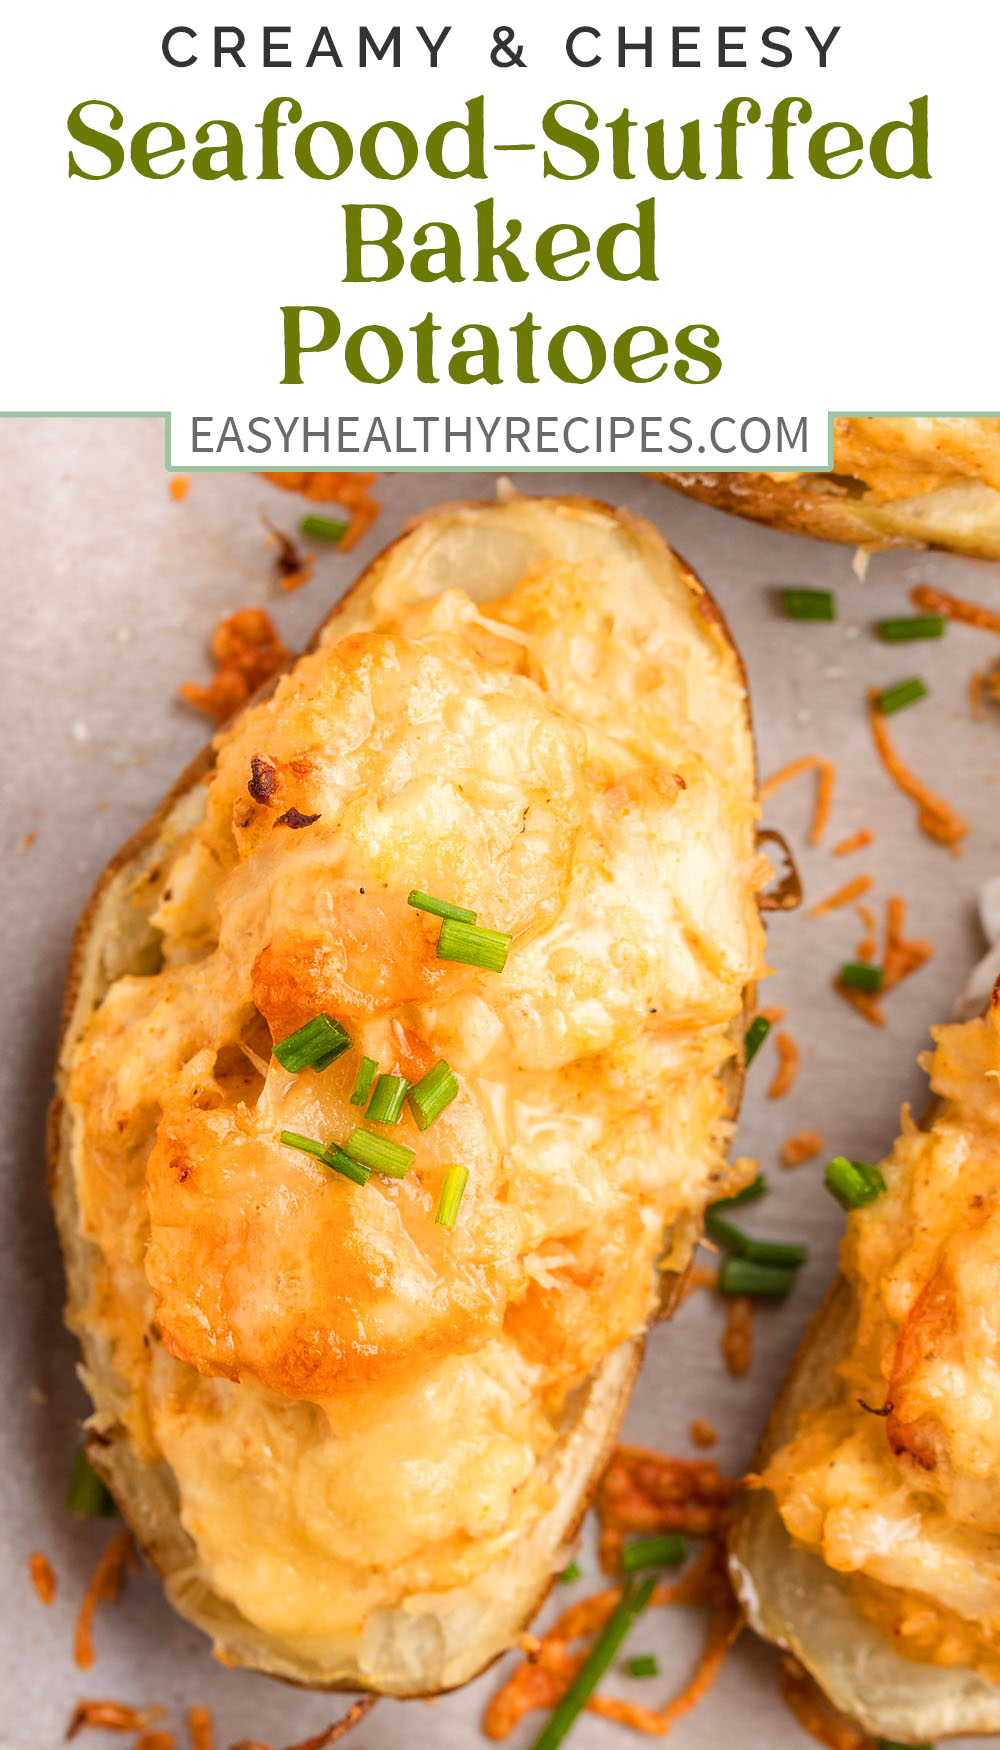 Pin graphic for seafood baked potato.